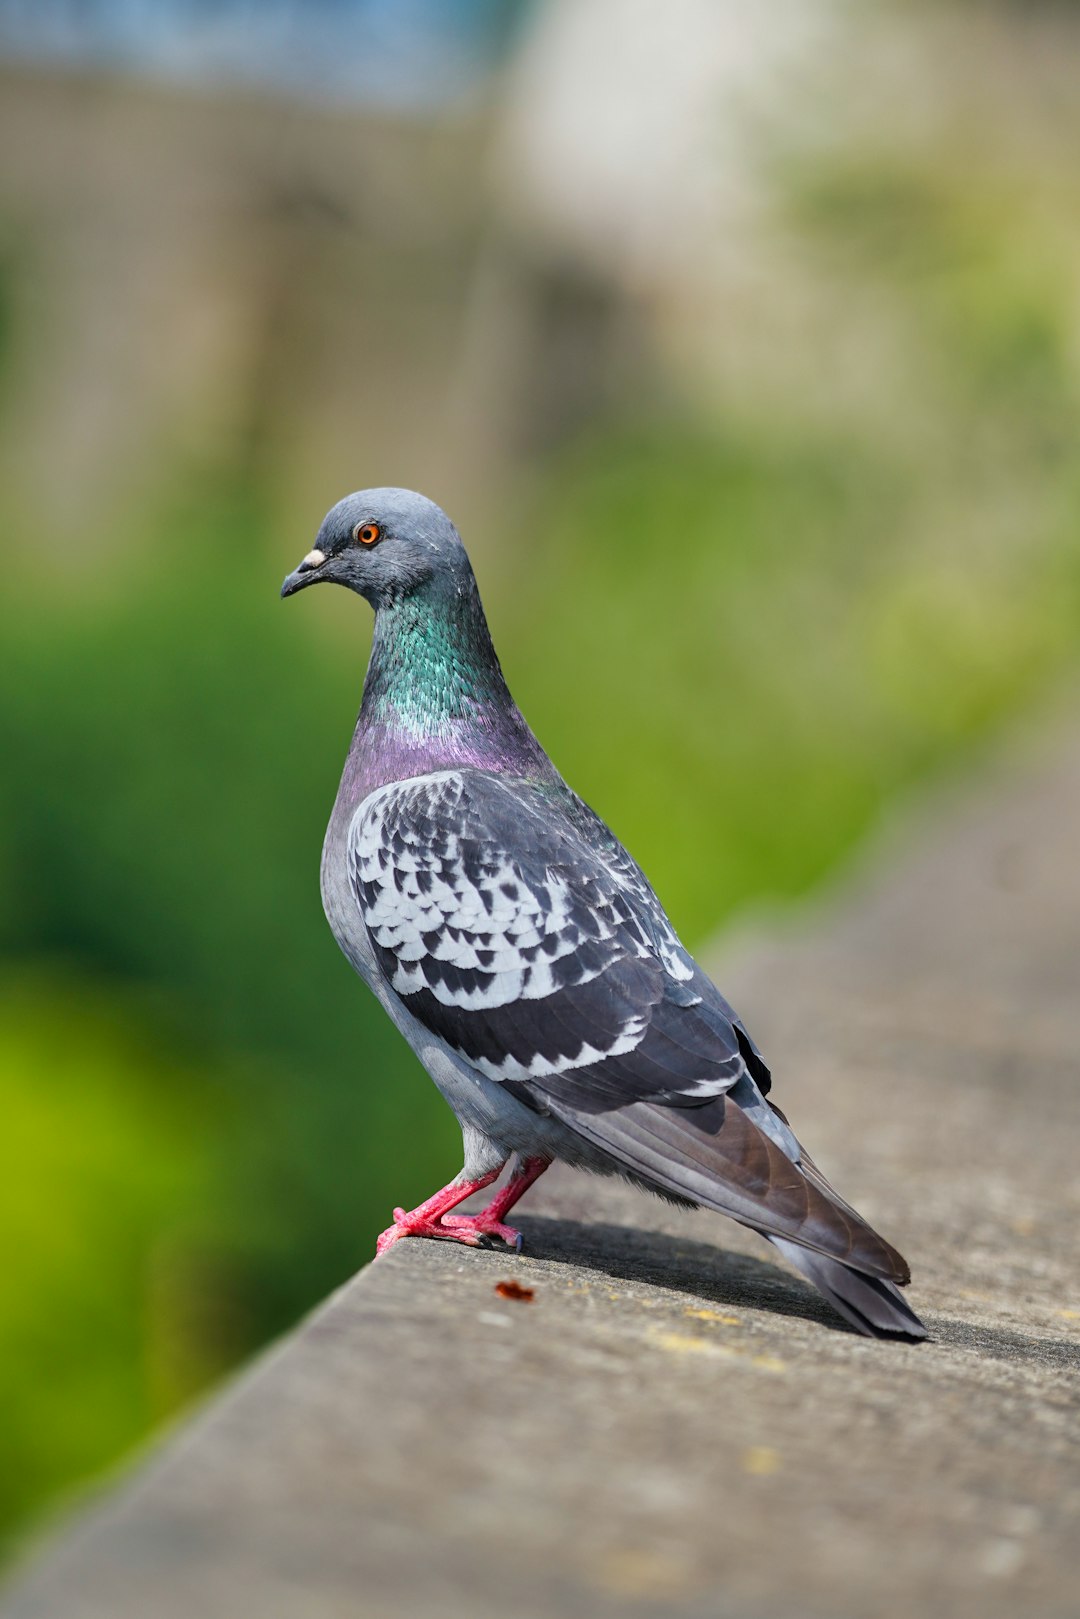  blue and gray bird on brown wooden table pigeon